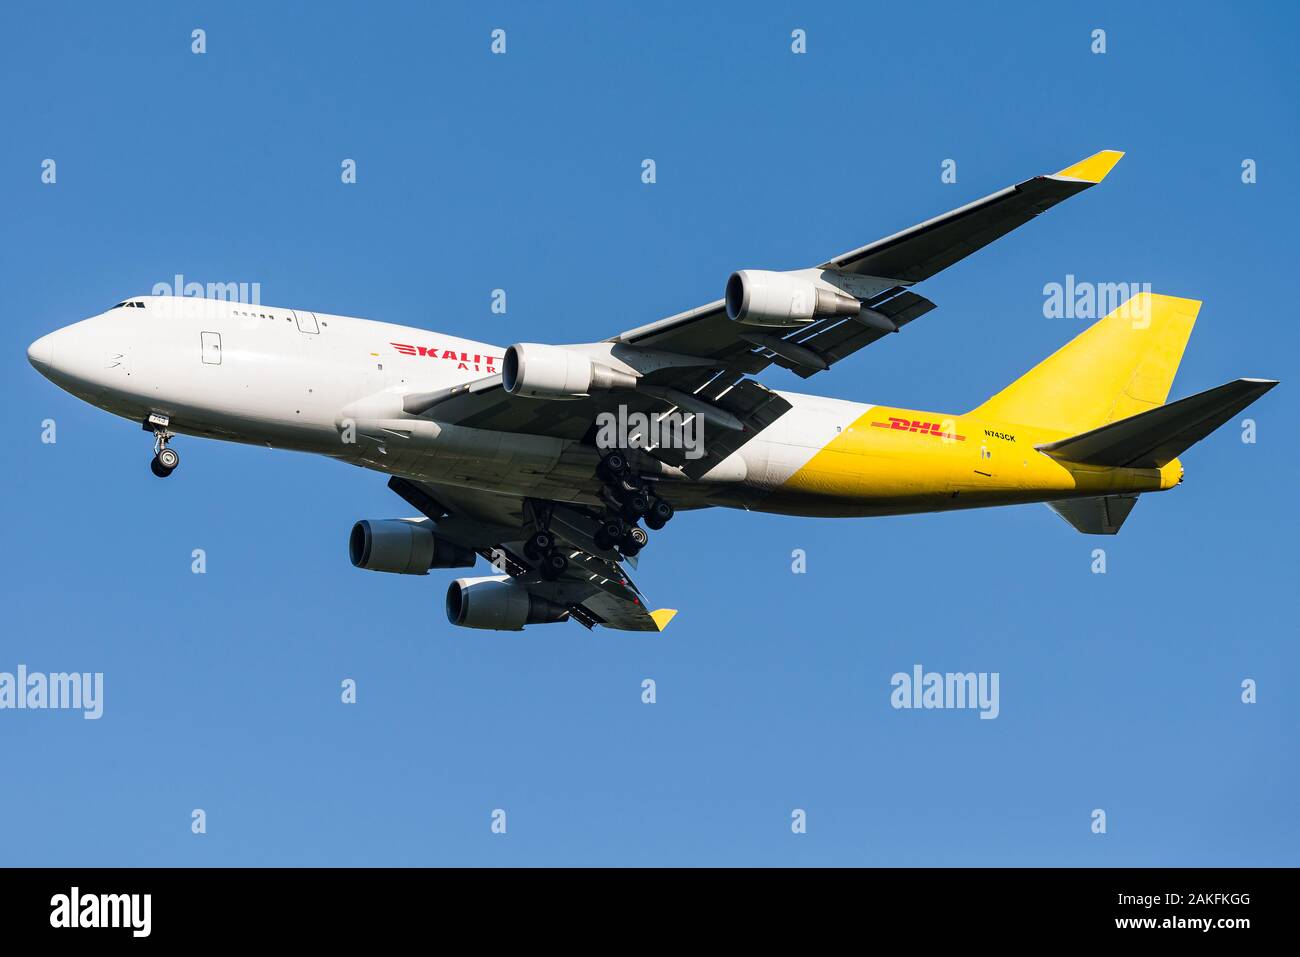 A Boeing 747-400 cargo airplane of Kalitta Air operating for DHL Aviation. Kalitta Air is an American cargo airline. Stock Photo